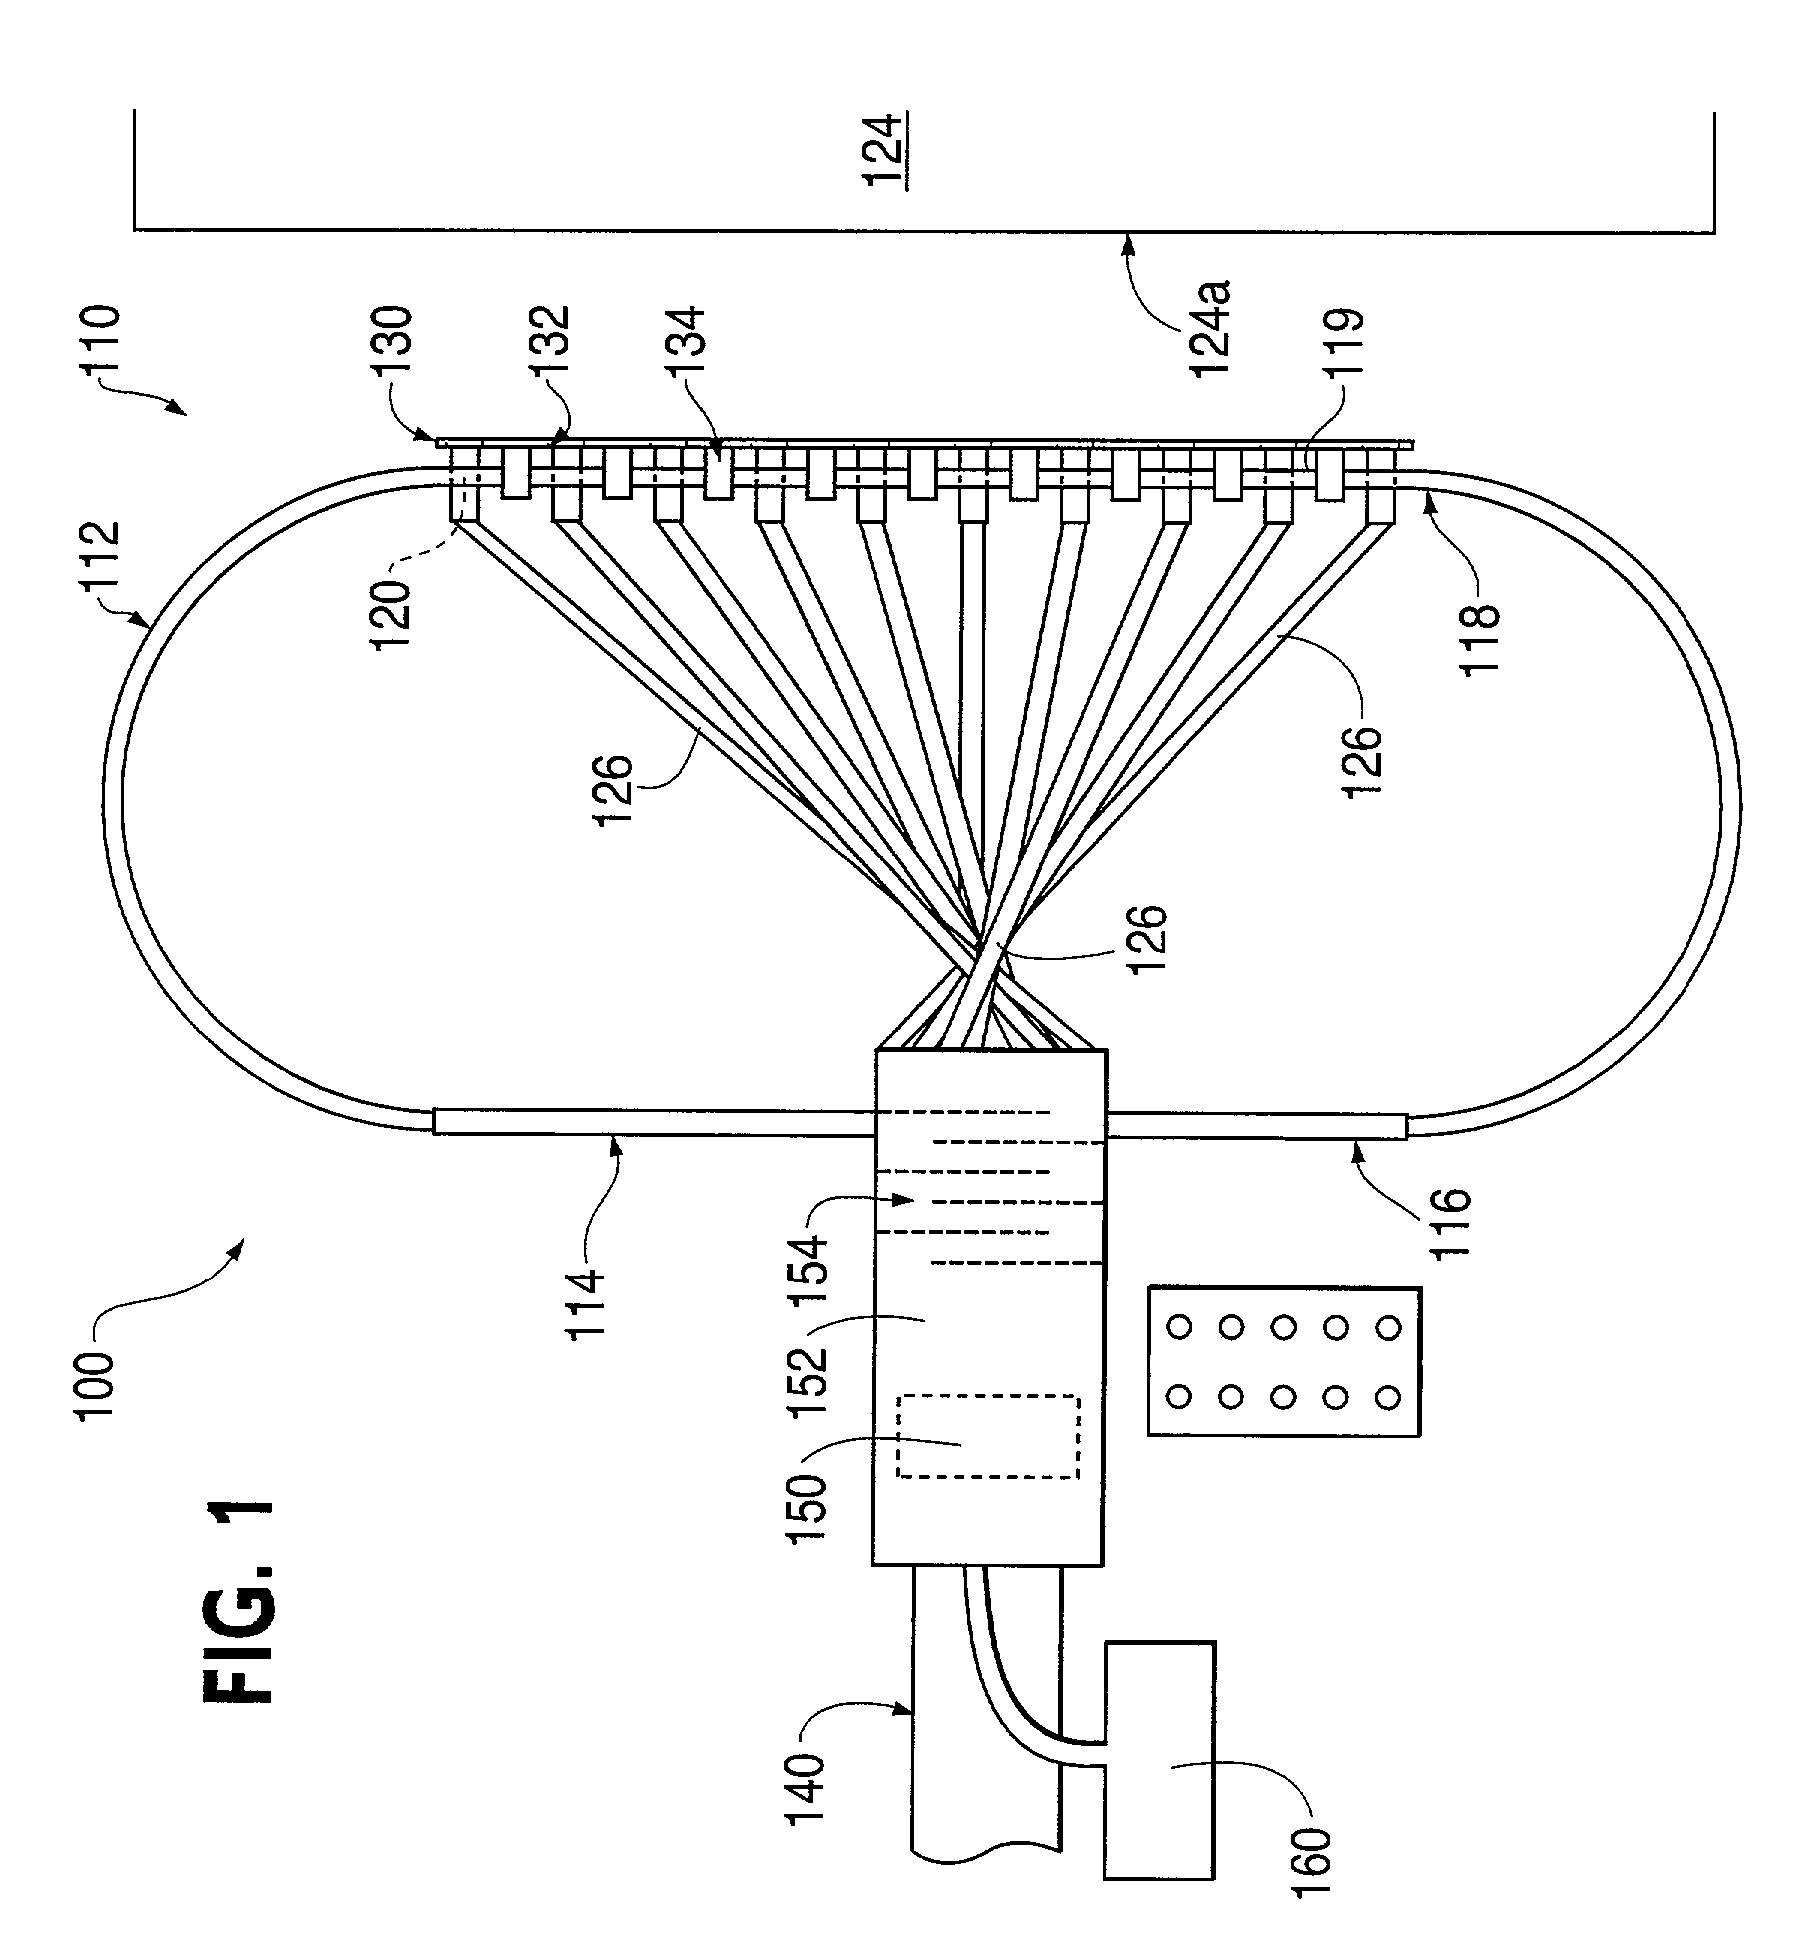 Heat sealer for stretch wrapping apparatus